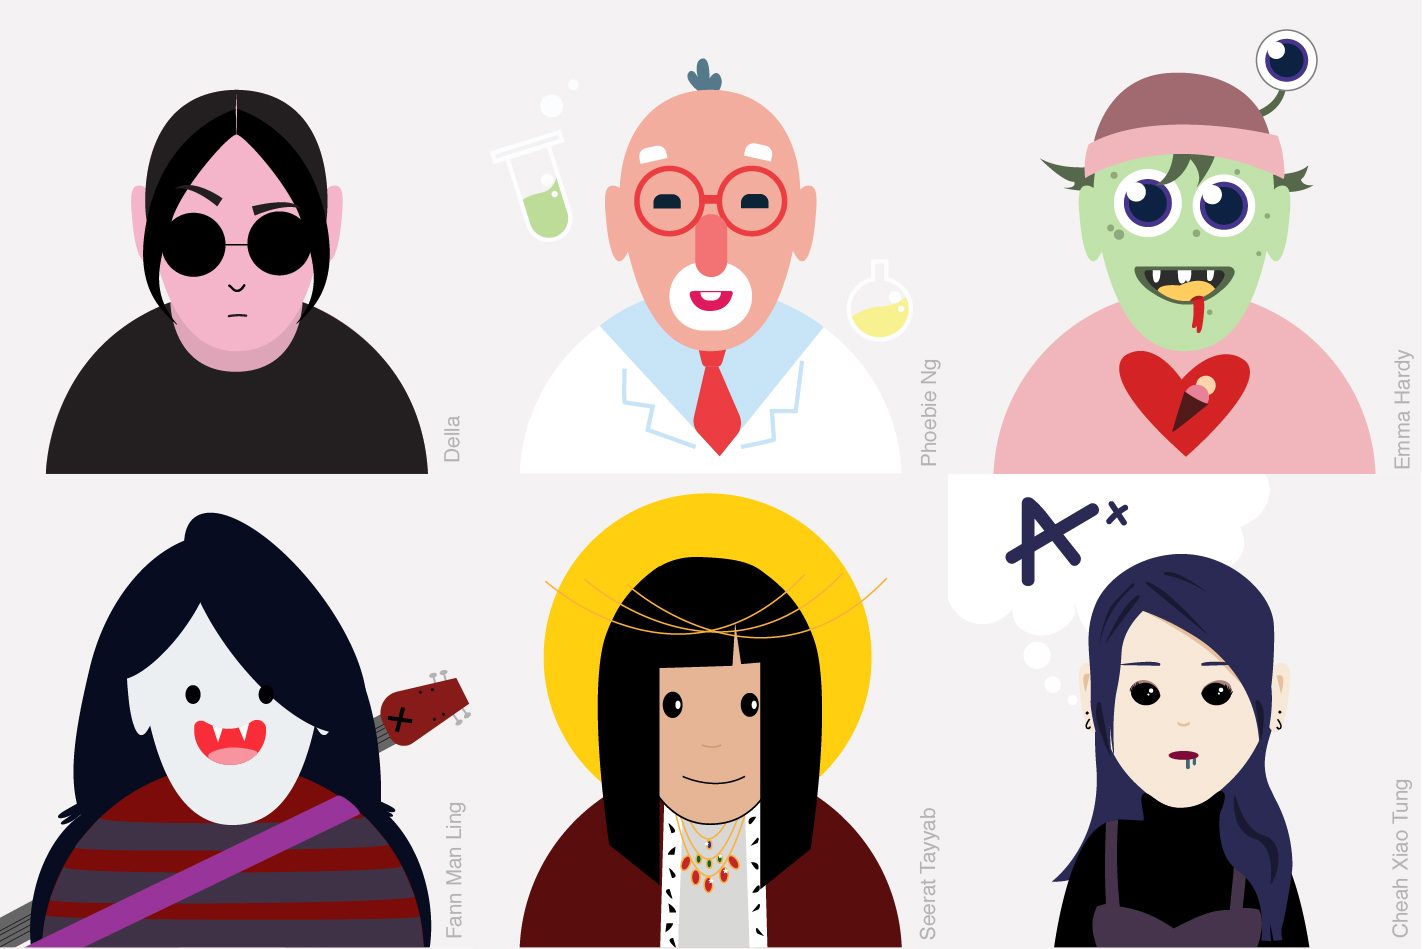 Graphically created personas